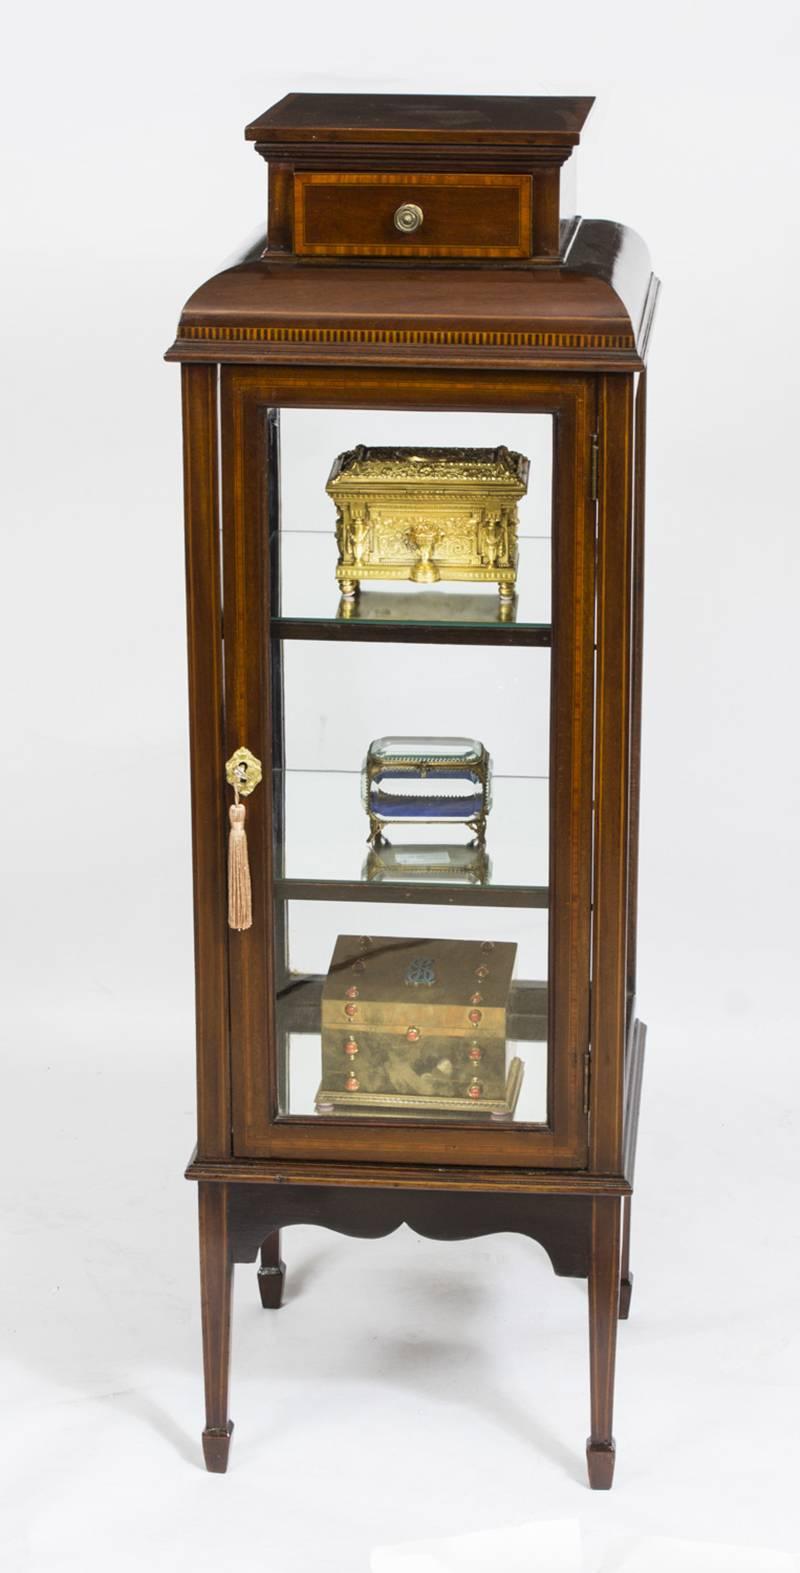 This is an exquisite antique Edwardian mahogany and inlaid square upright display cabinet, circa 1890 in date.

This cabinet is elegantly crafted in mahogany beautifully crossbanded in satinwood that is bordered with boxwood and ebony